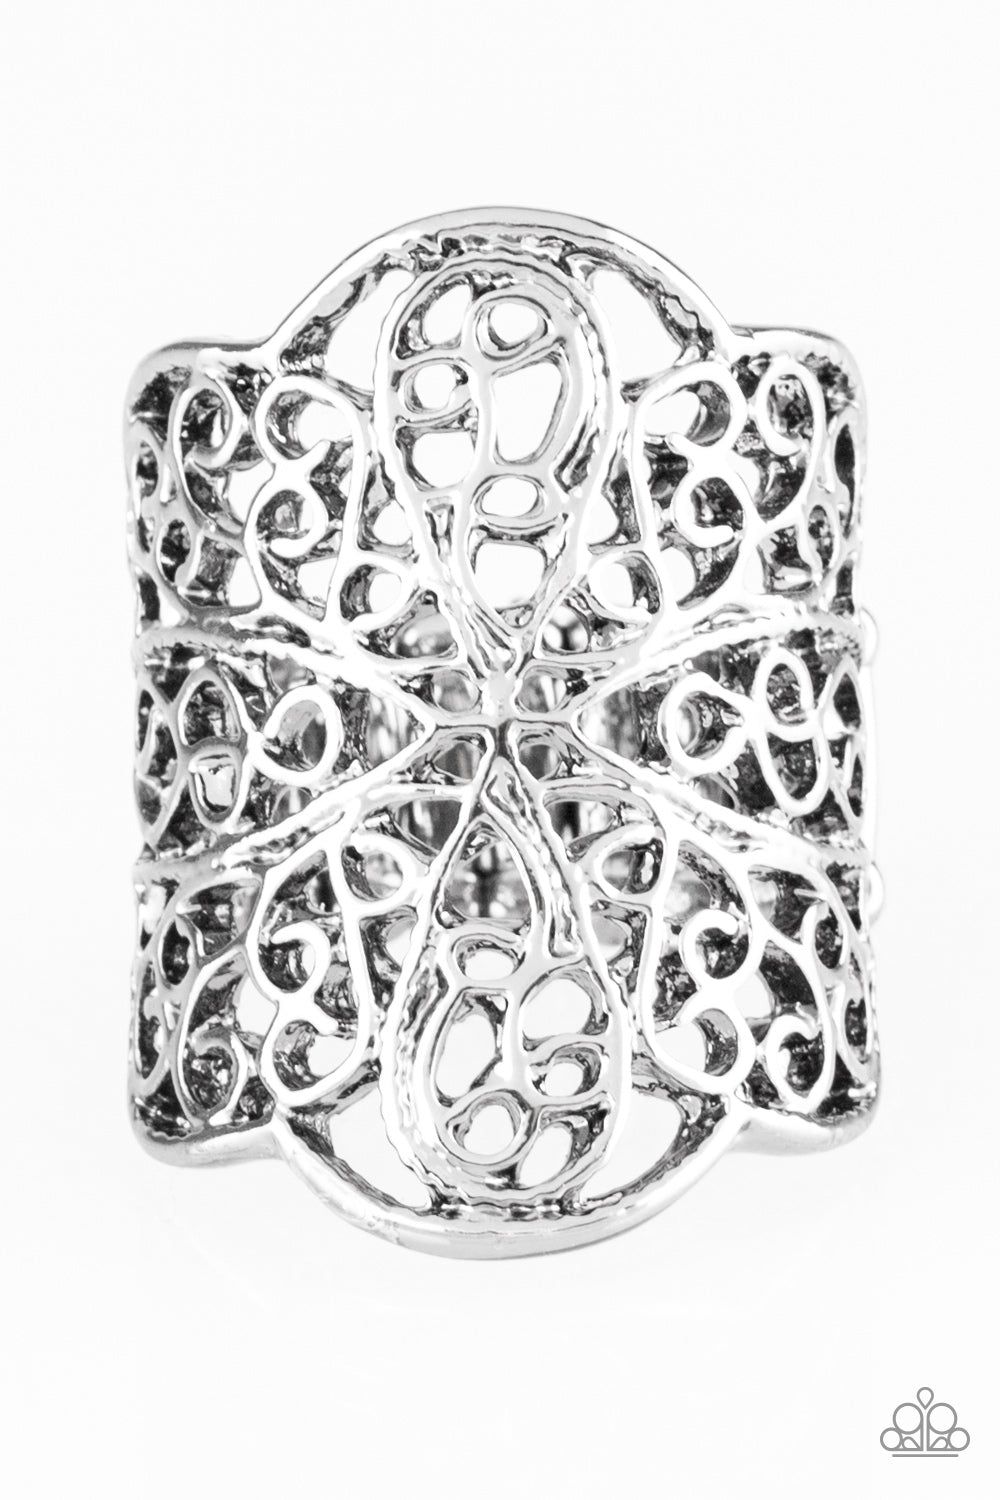 The Way You Make Me FRILL - Silver Ring - Susan's Jewelry Shop